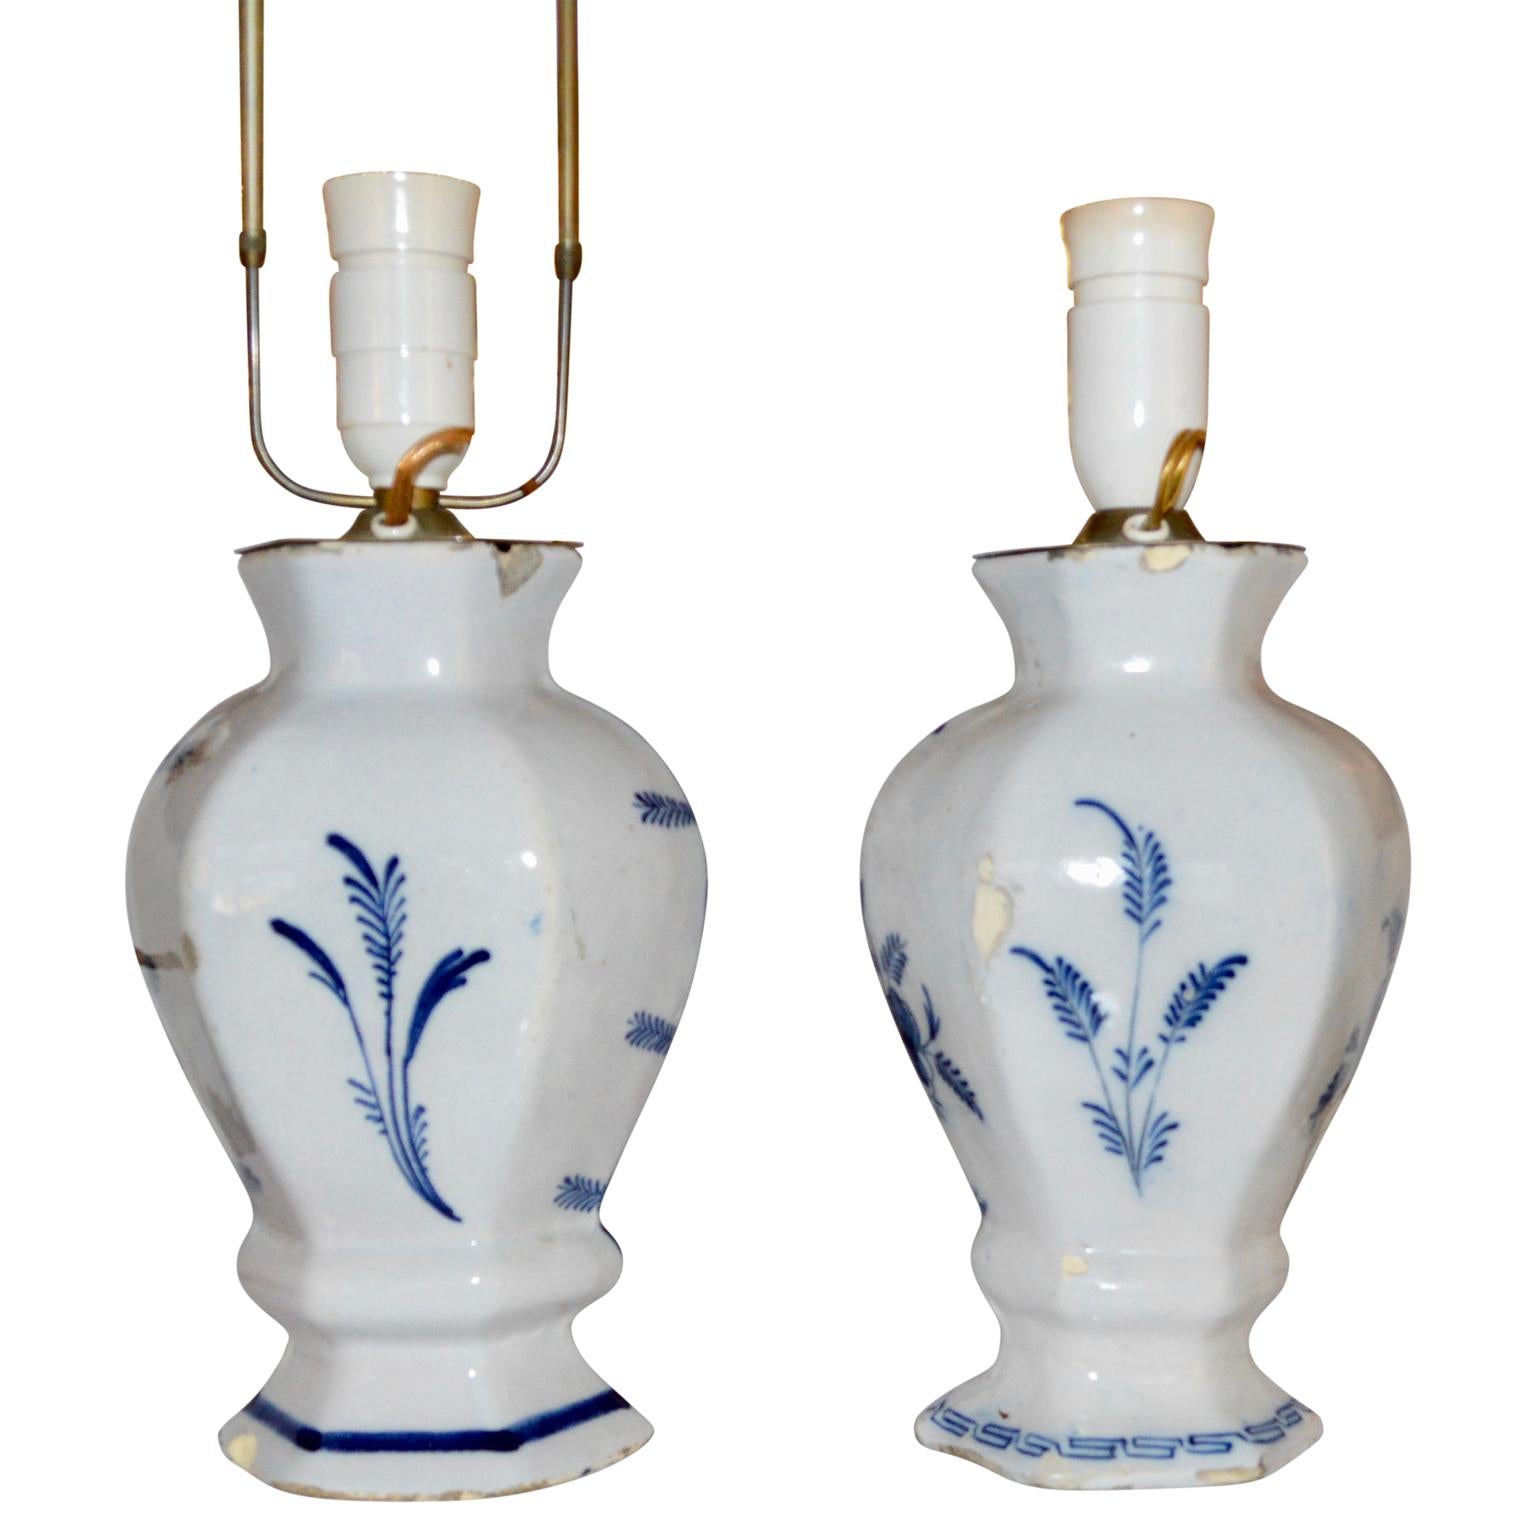 Pair Of 18th Century Blue And White Delft Table Lamps (Delfter Blau)